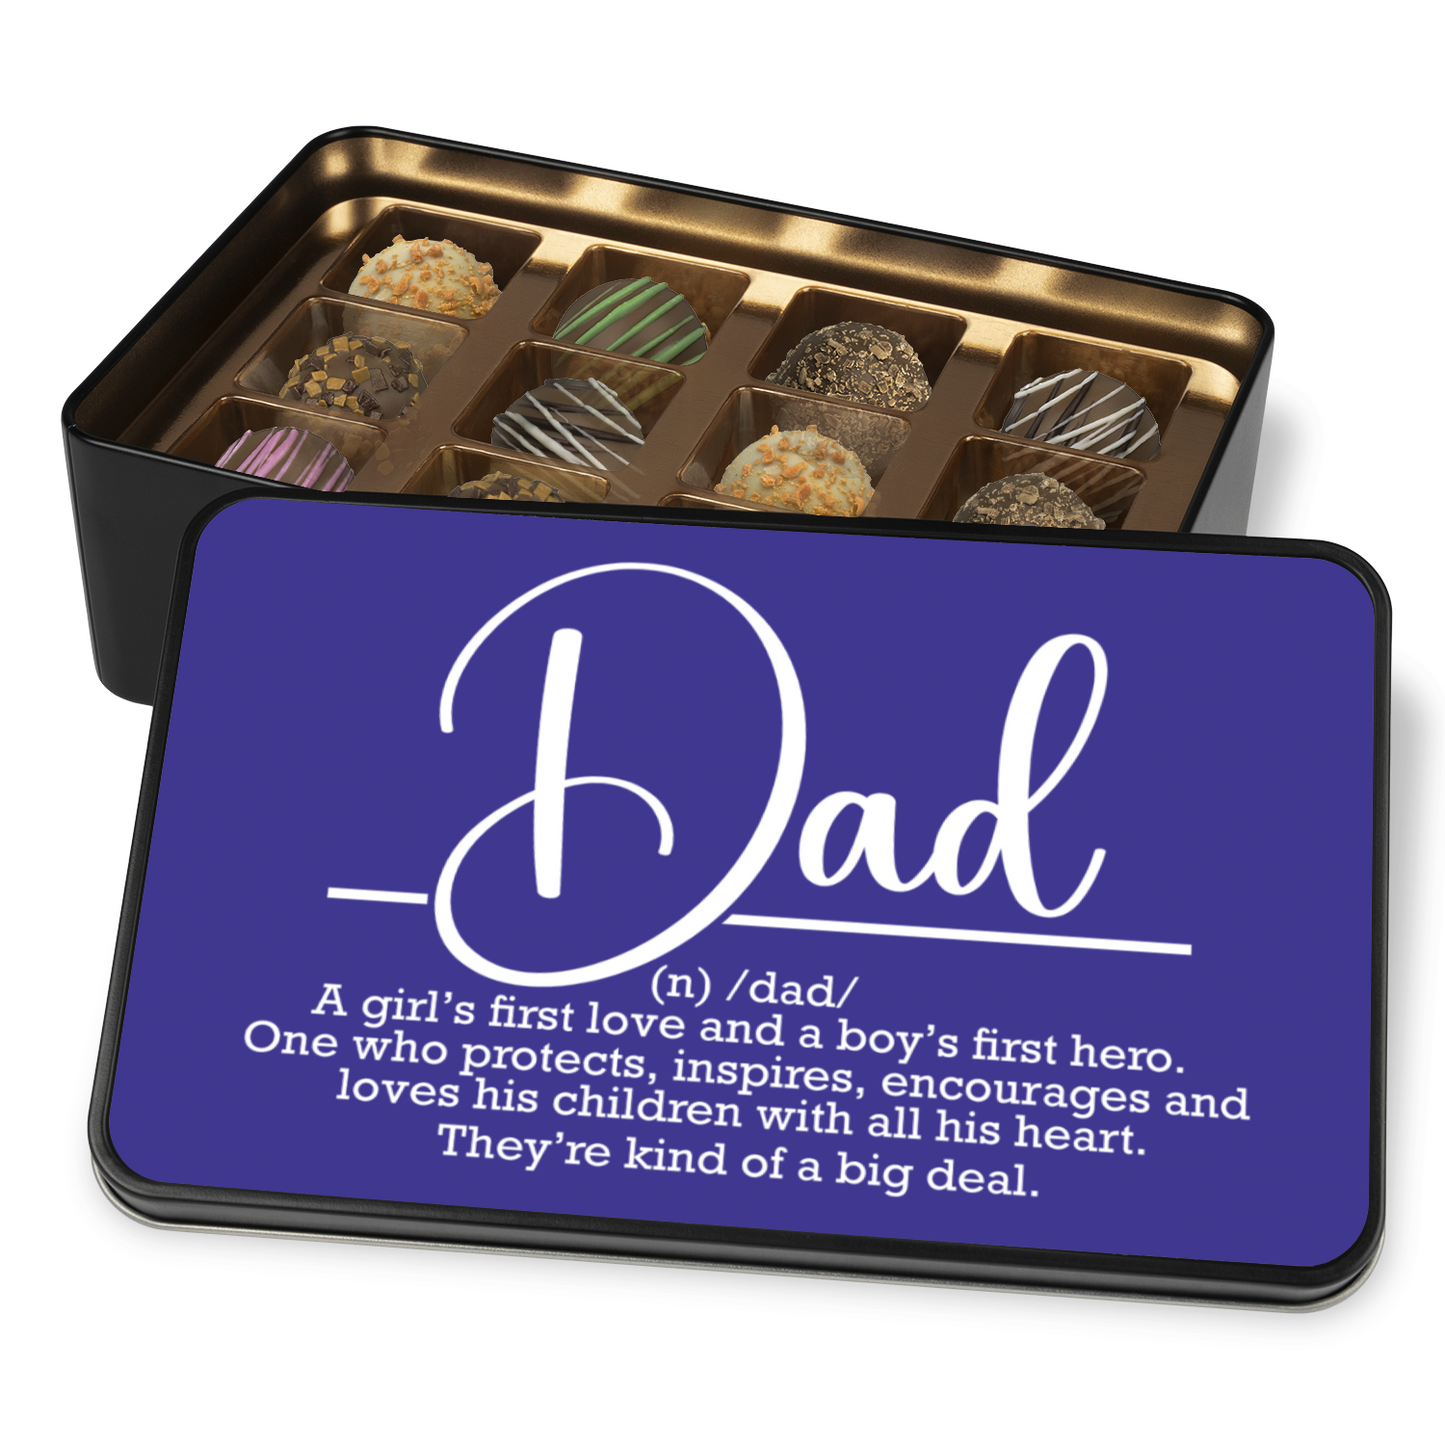 Fathers Day Gift - Chocolate Artisan Truffles - Keepsake Tin - Gift from Daughter - Gift from Wife